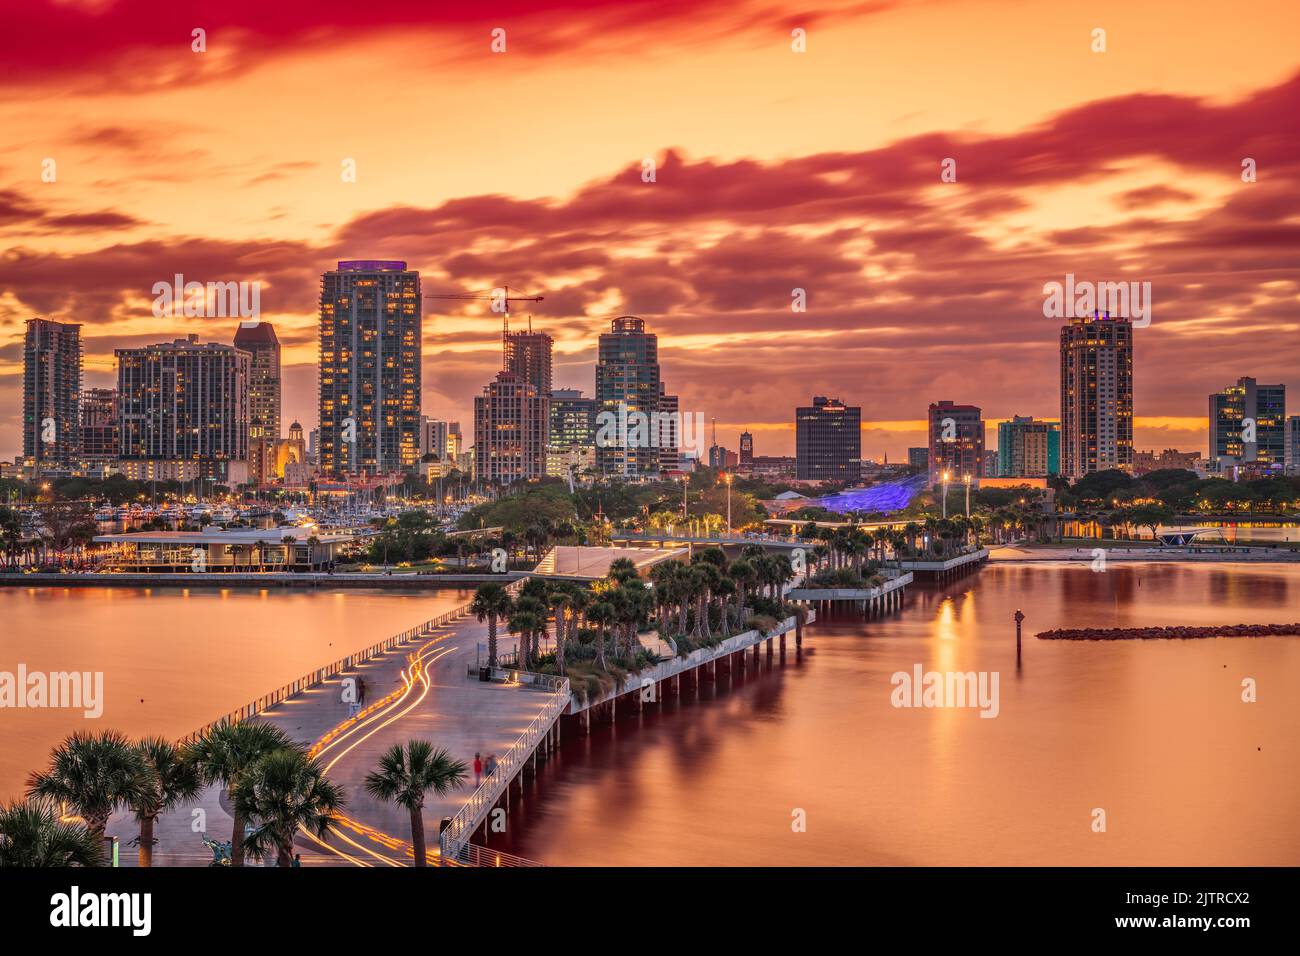 St. Pete, Florida, USA downtown city skyline from the pier at night. Stock Photo